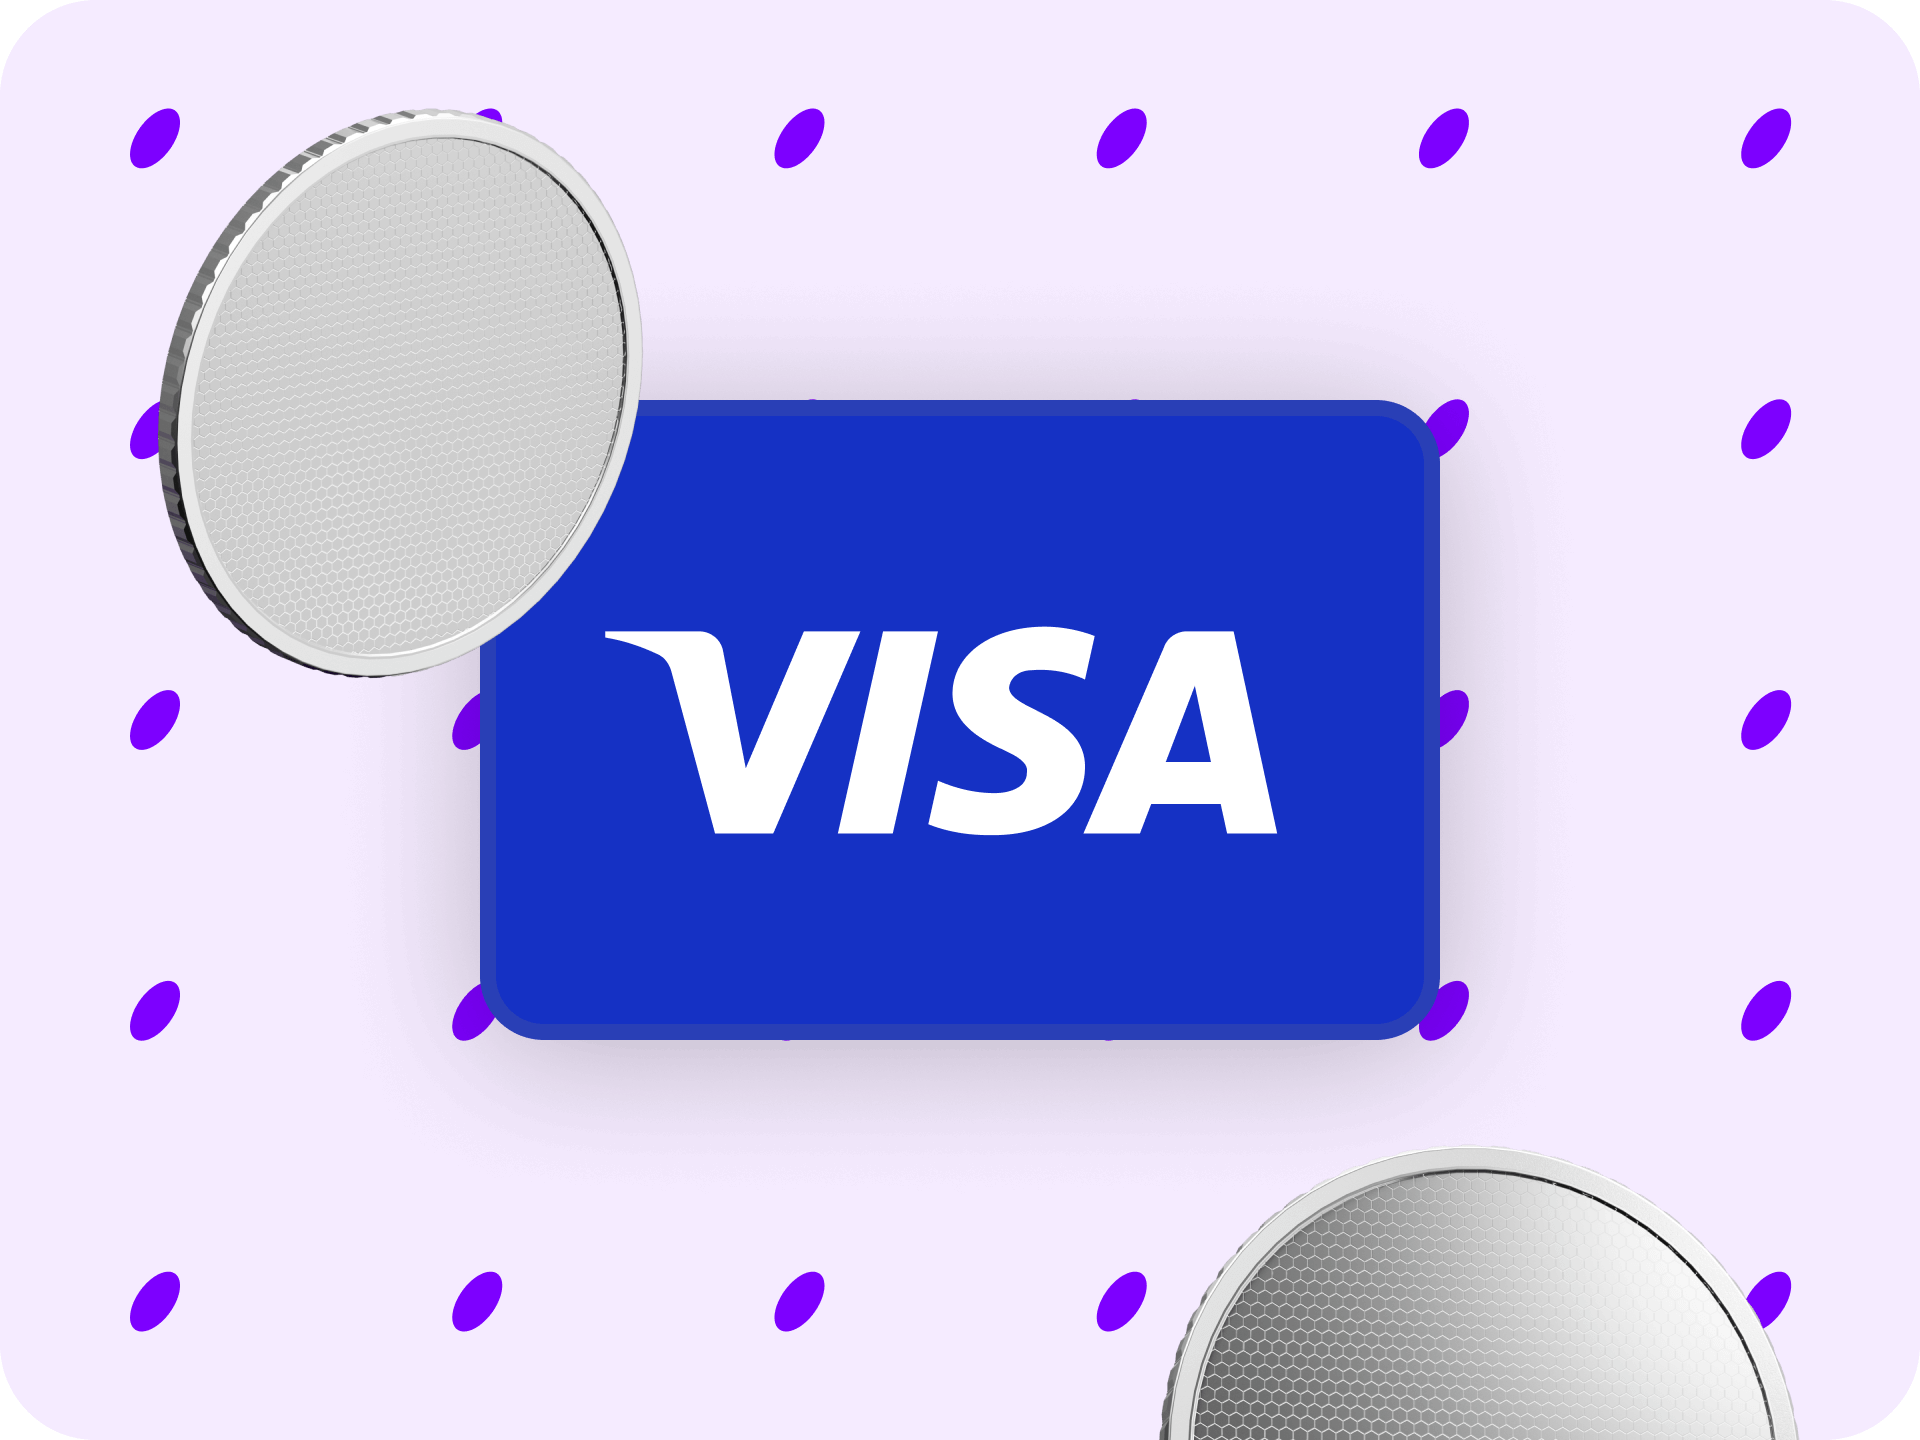 Sell crypto with your VISA card